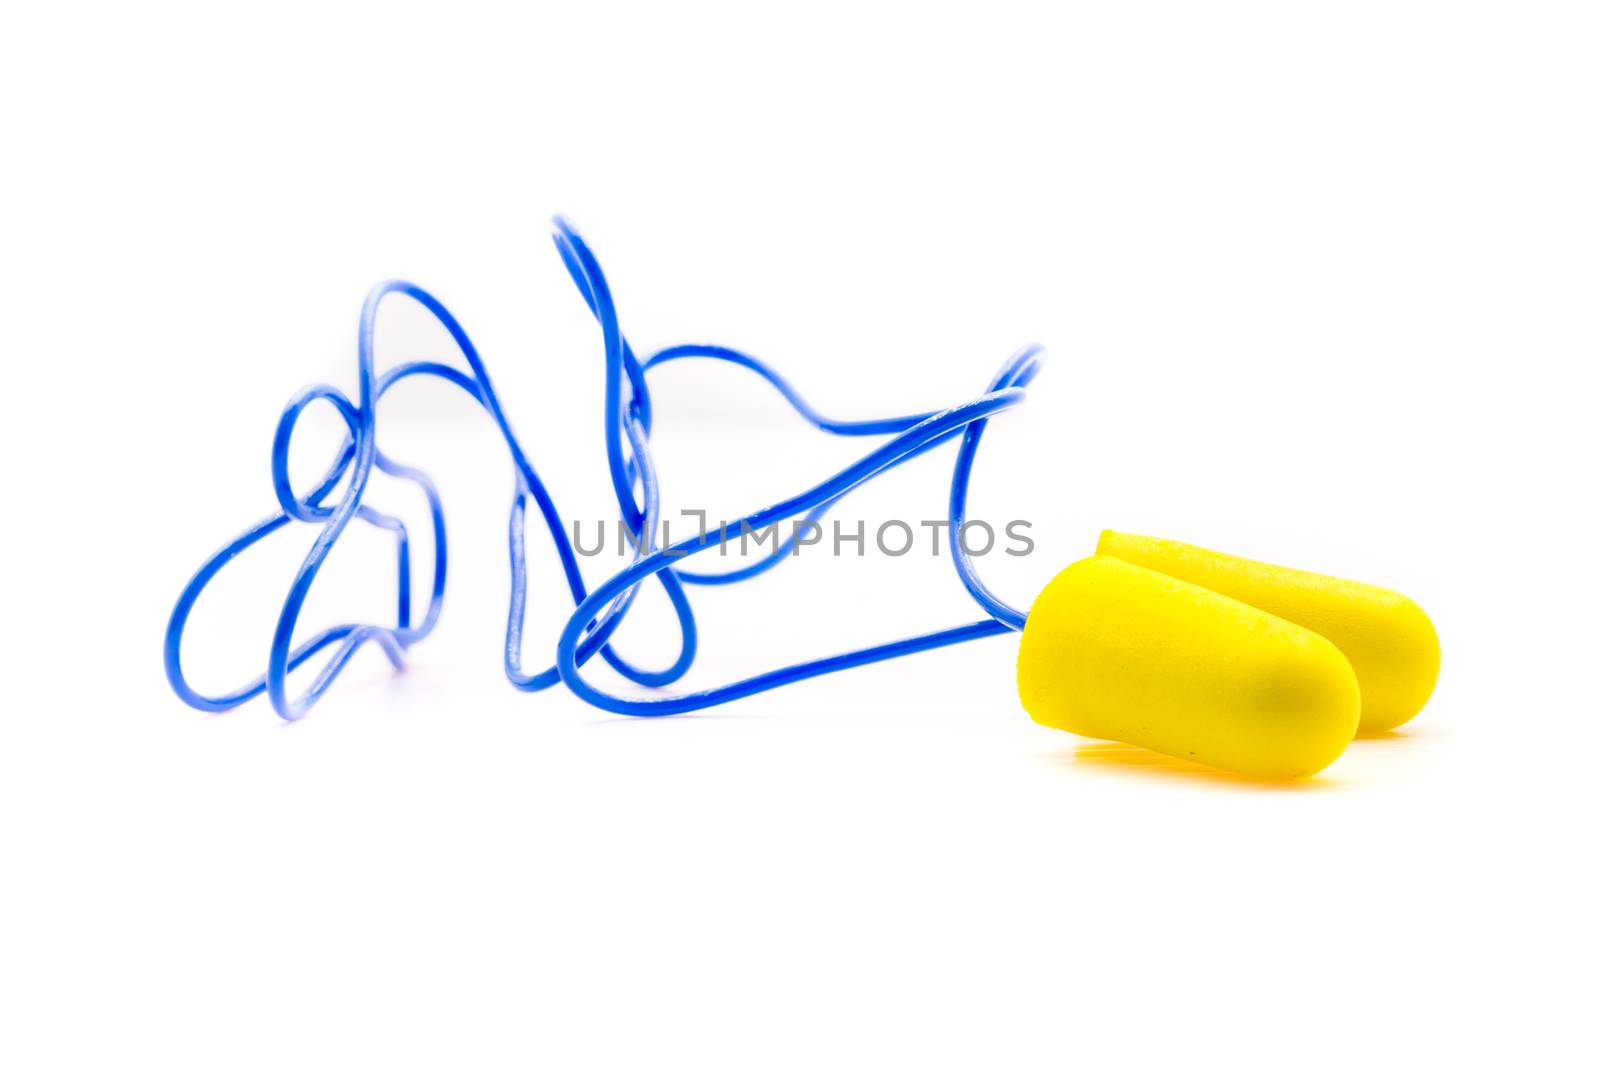 Yellow earplugs with blue band on white background.